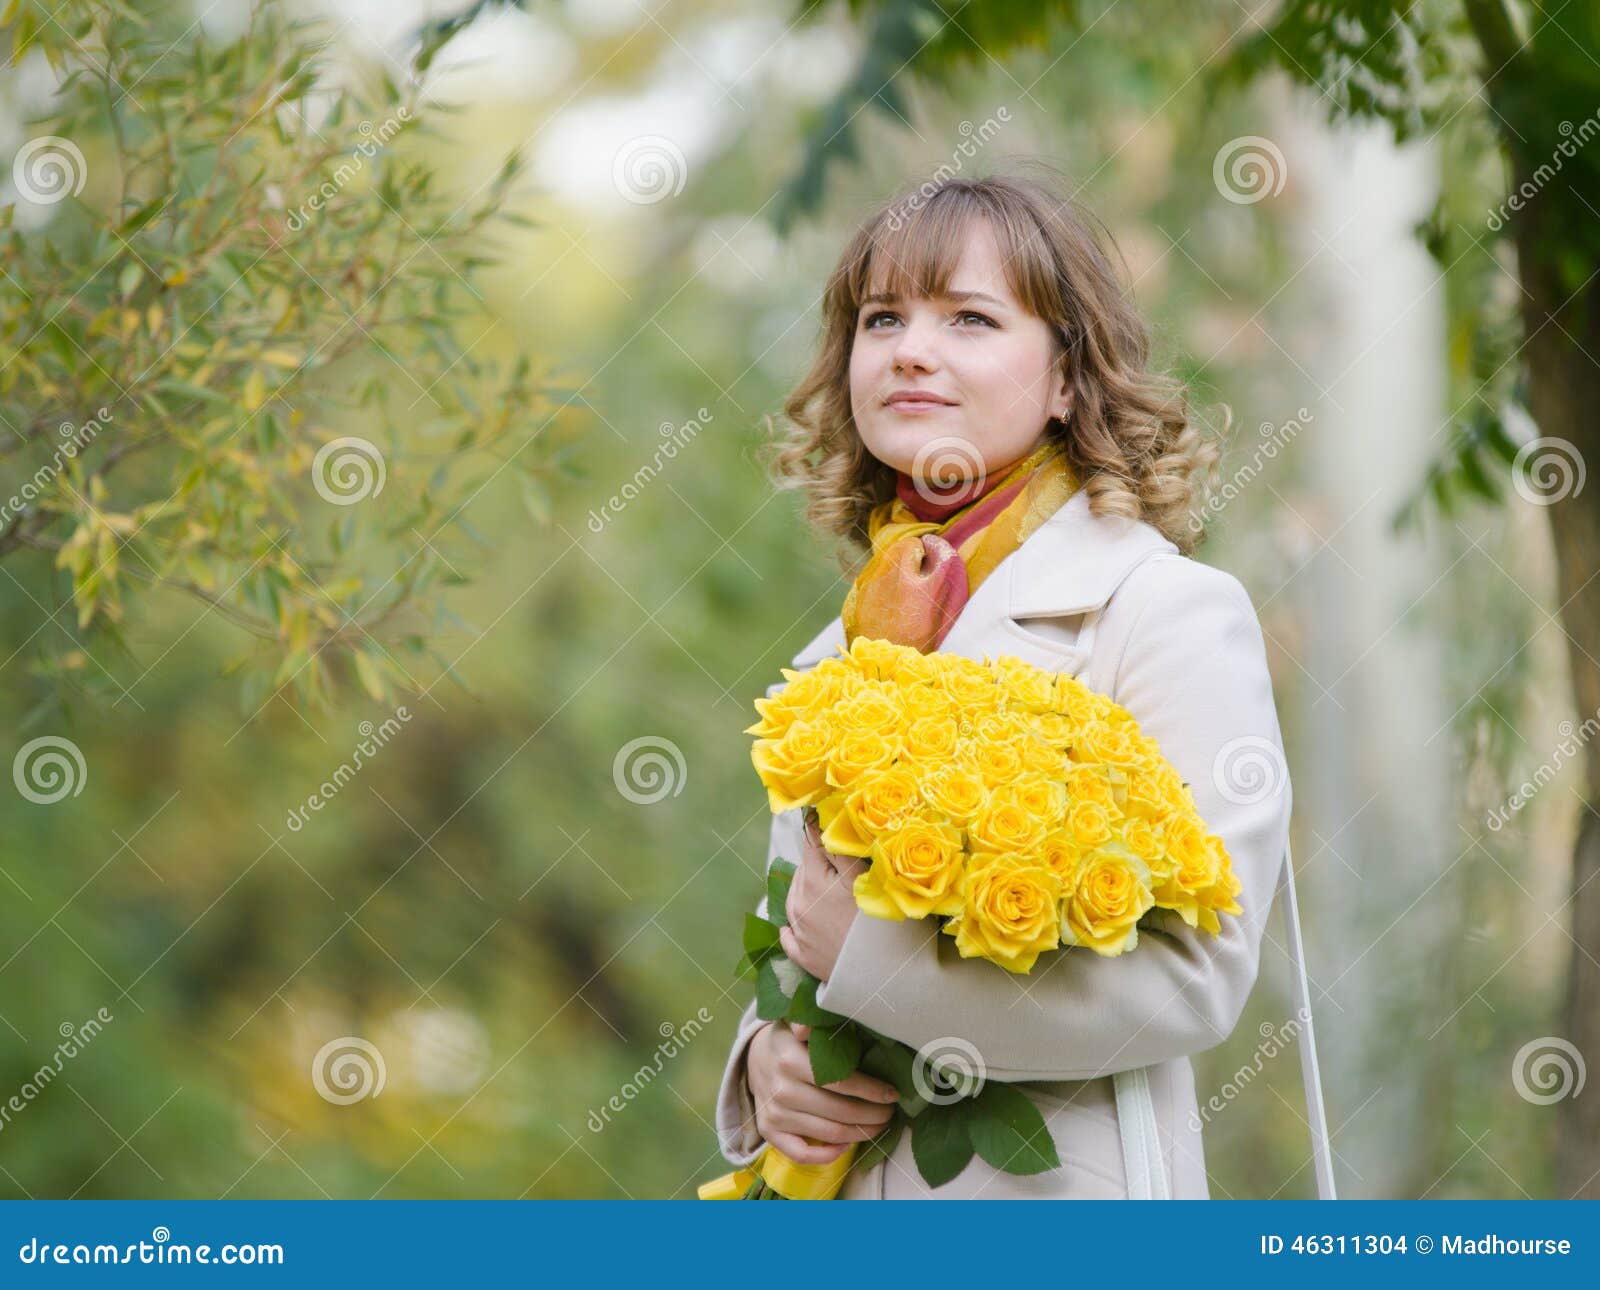 Girl on Nature with a Bouquet of Yellow Roses Stock Photo - Image of ...